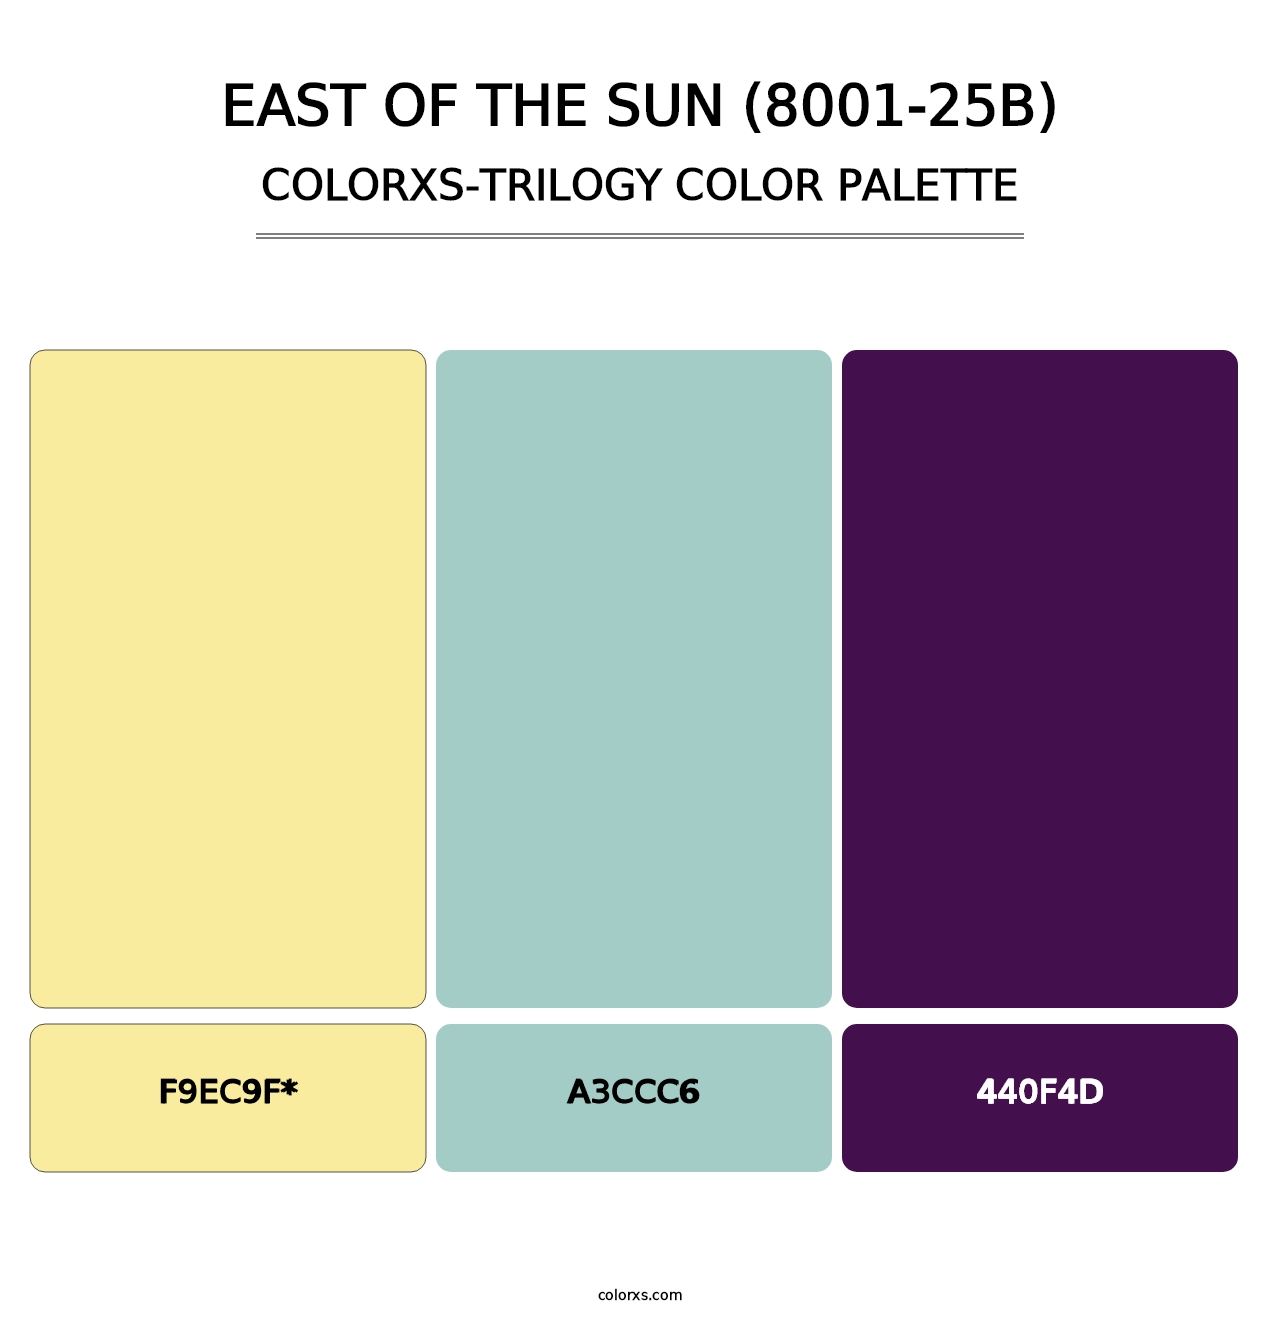 East of the Sun (8001-25B) - Colorxs Trilogy Palette